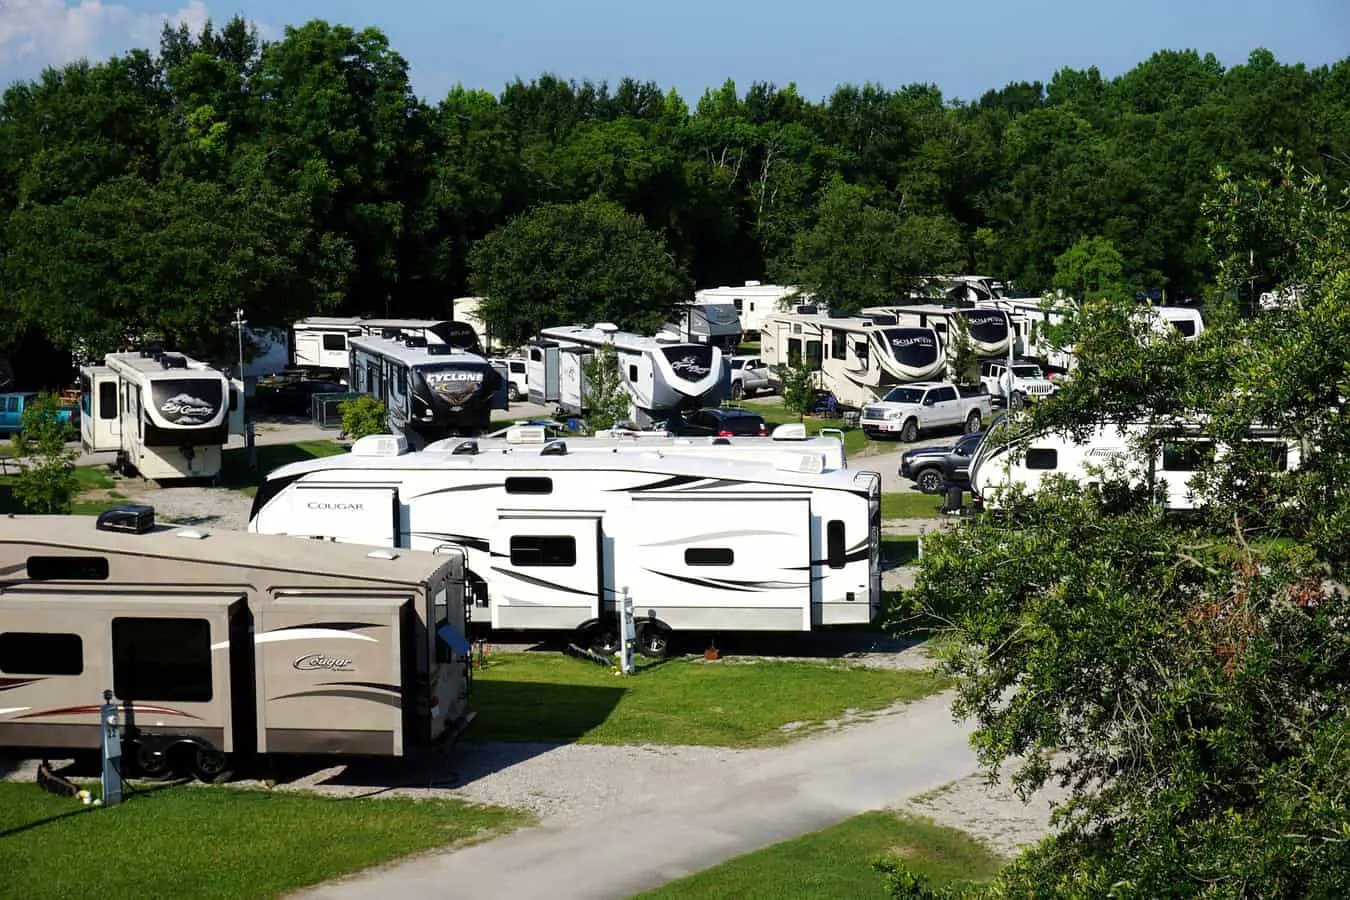 How to Stay Safe While Towing and Parking Your Travel Trailer